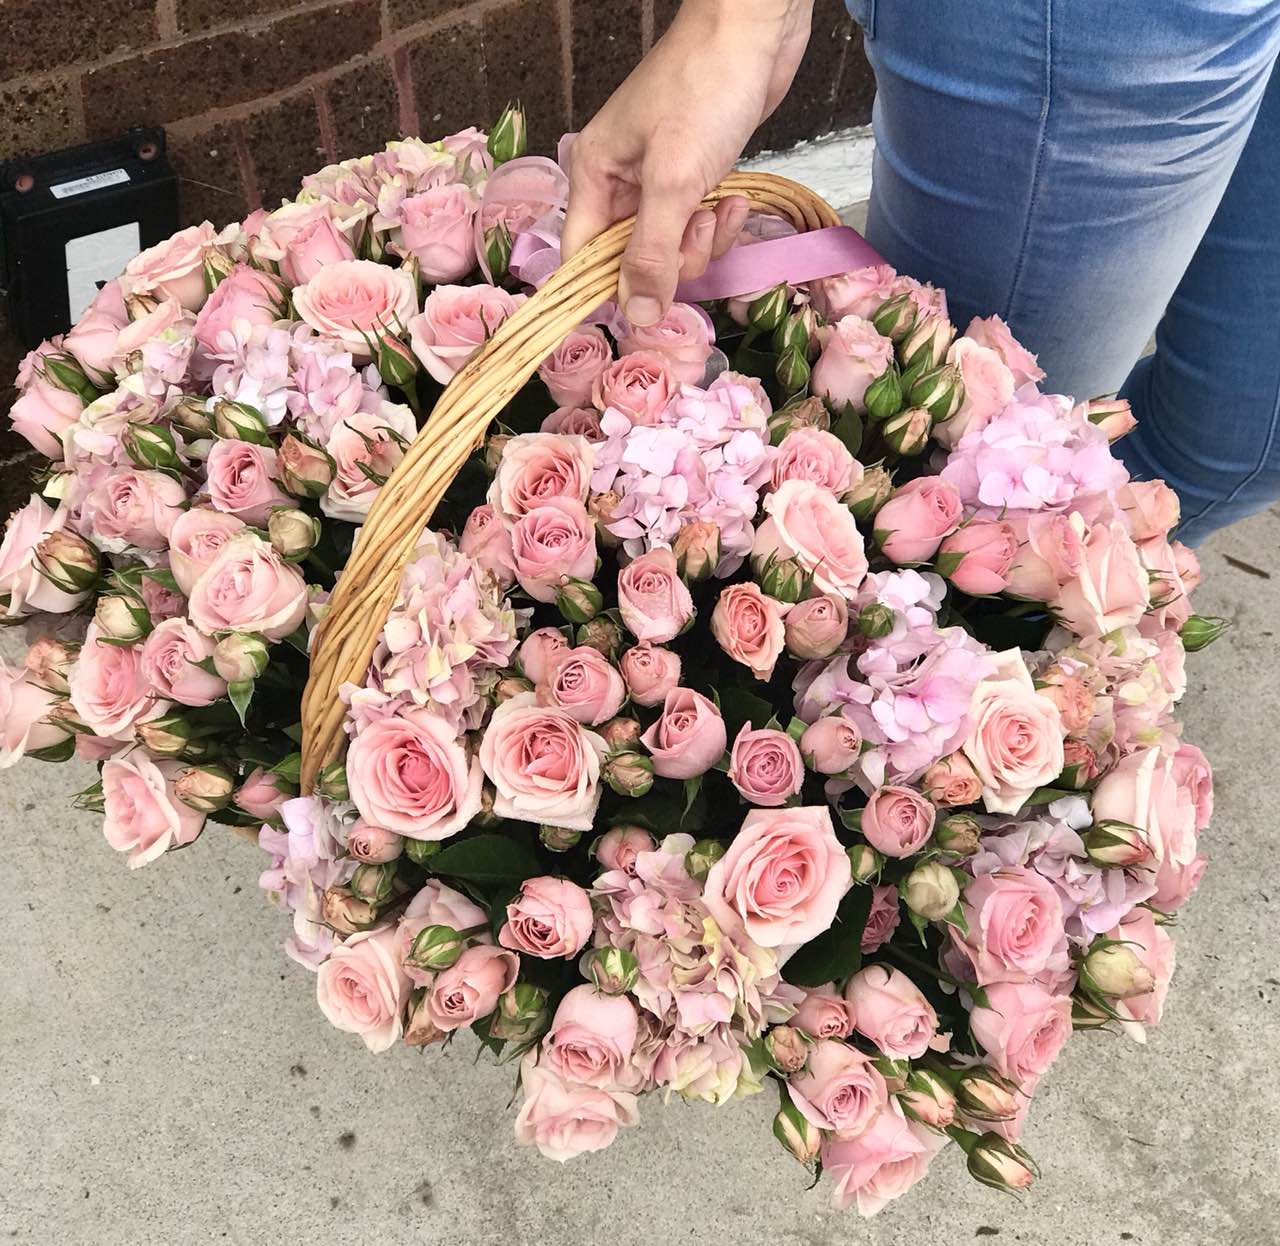 Welcome the newest little cutie into the world with this pink-tastic basket of roses and hydrangea.  Includes:  Pink mini roses, pink hydrangea. Basket Free message card